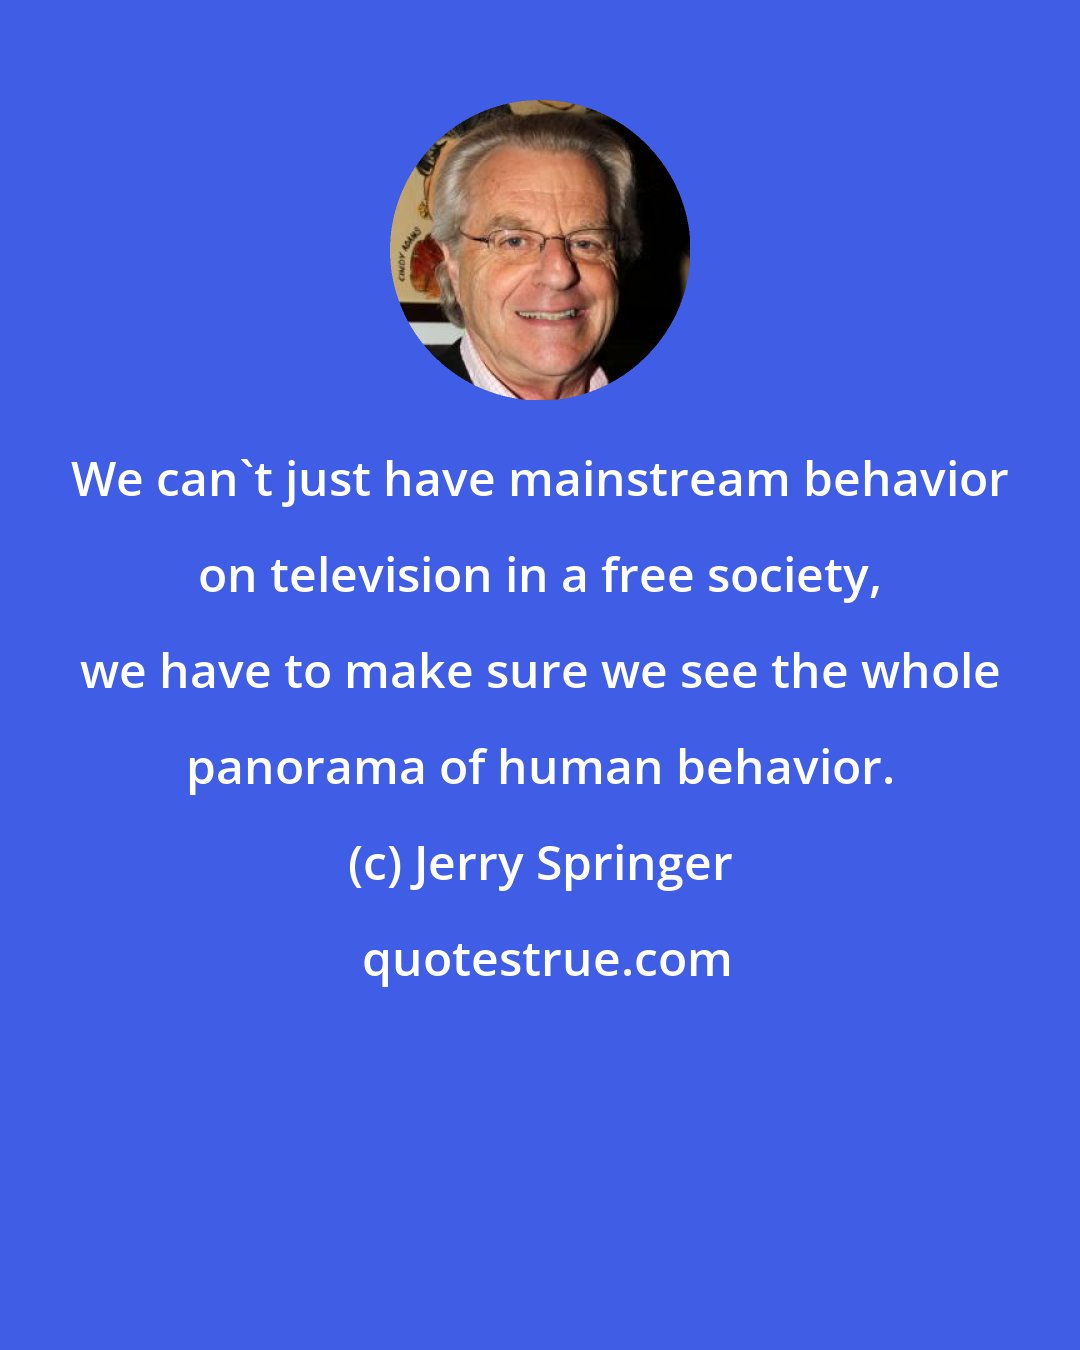 Jerry Springer: We can't just have mainstream behavior on television in a free society, we have to make sure we see the whole panorama of human behavior.